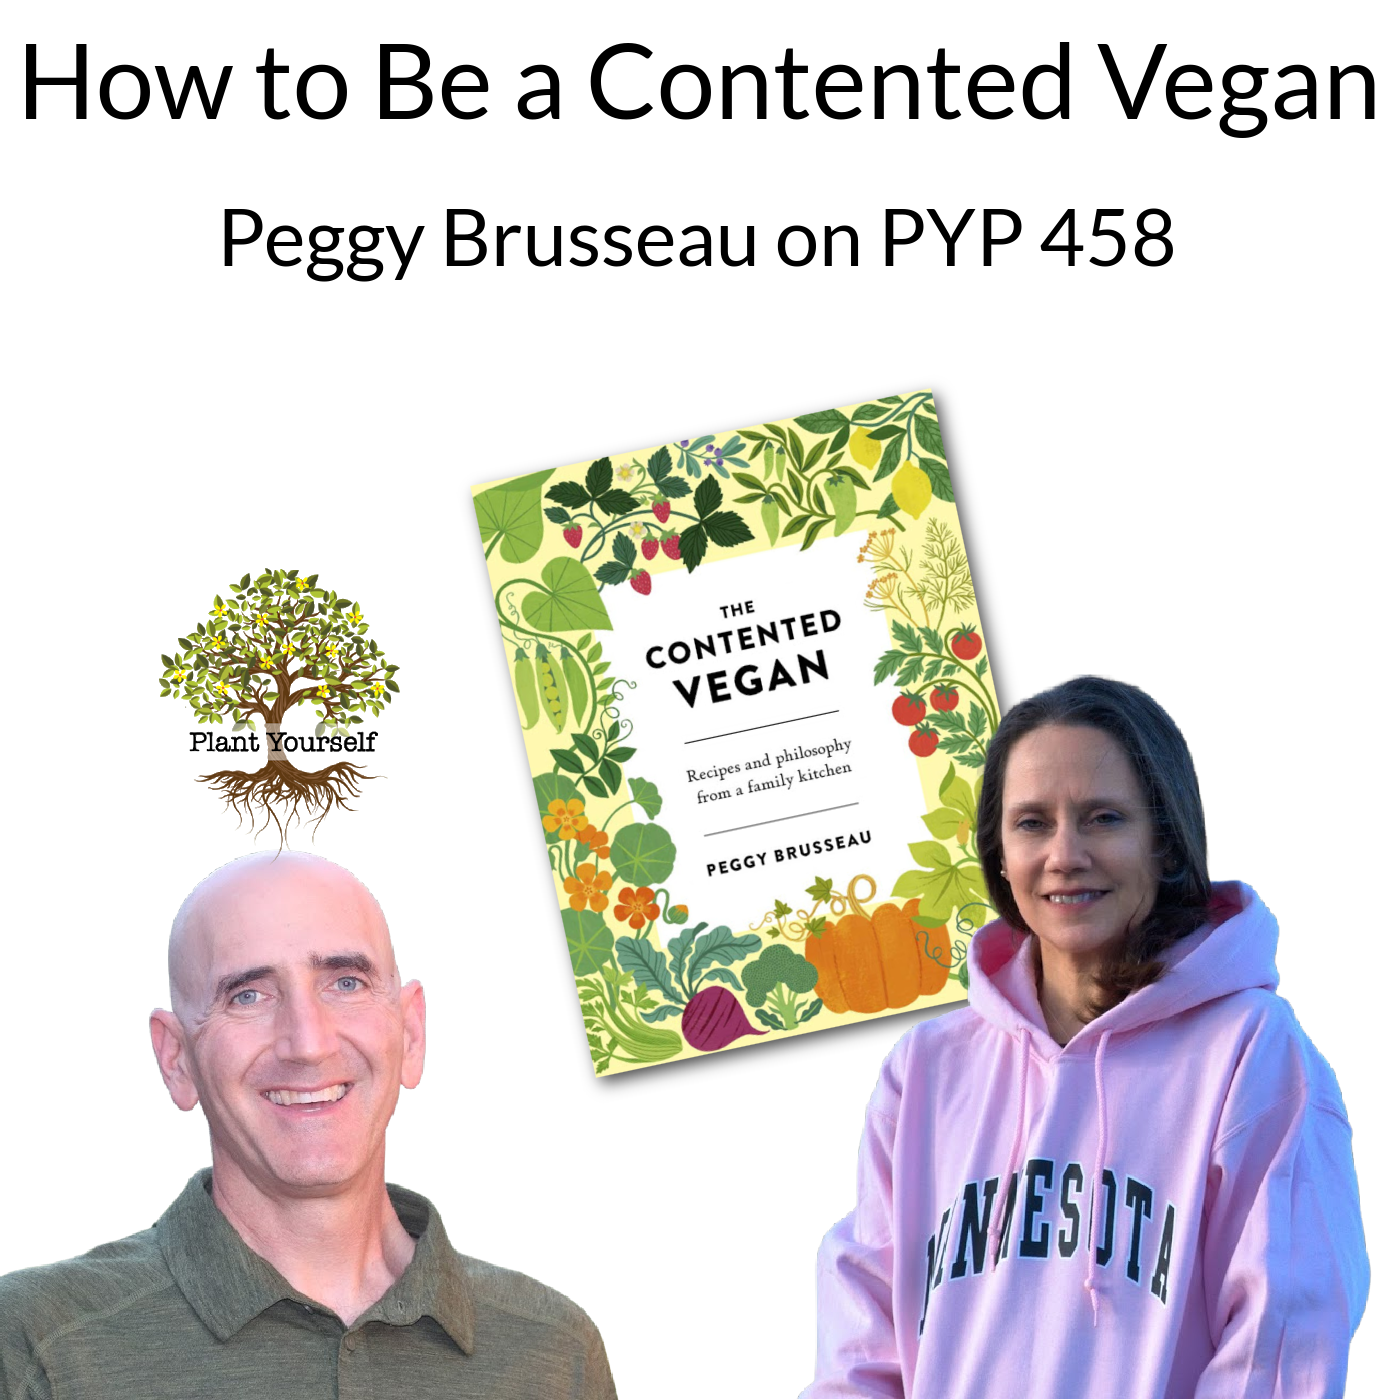 How to Be a Contented Vegan: Peggy Brusseau on PYP 458